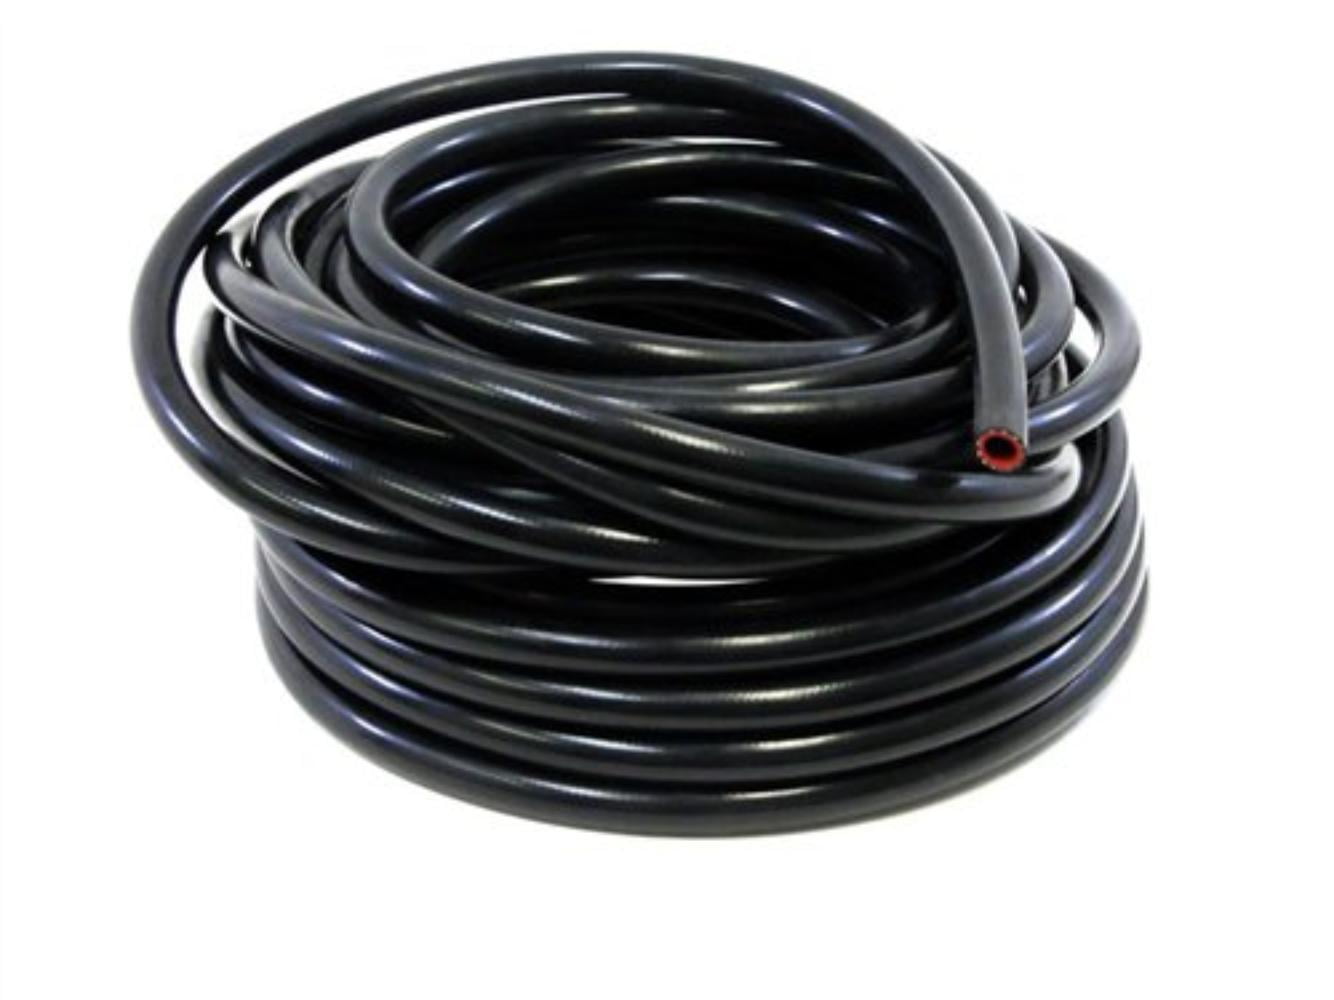 Bend Radius: 1 Max Temperature Rating: 350F HPS 1/4 ID Black high temp reinforced silicone heater hose Max Working Pressure 85 psi 